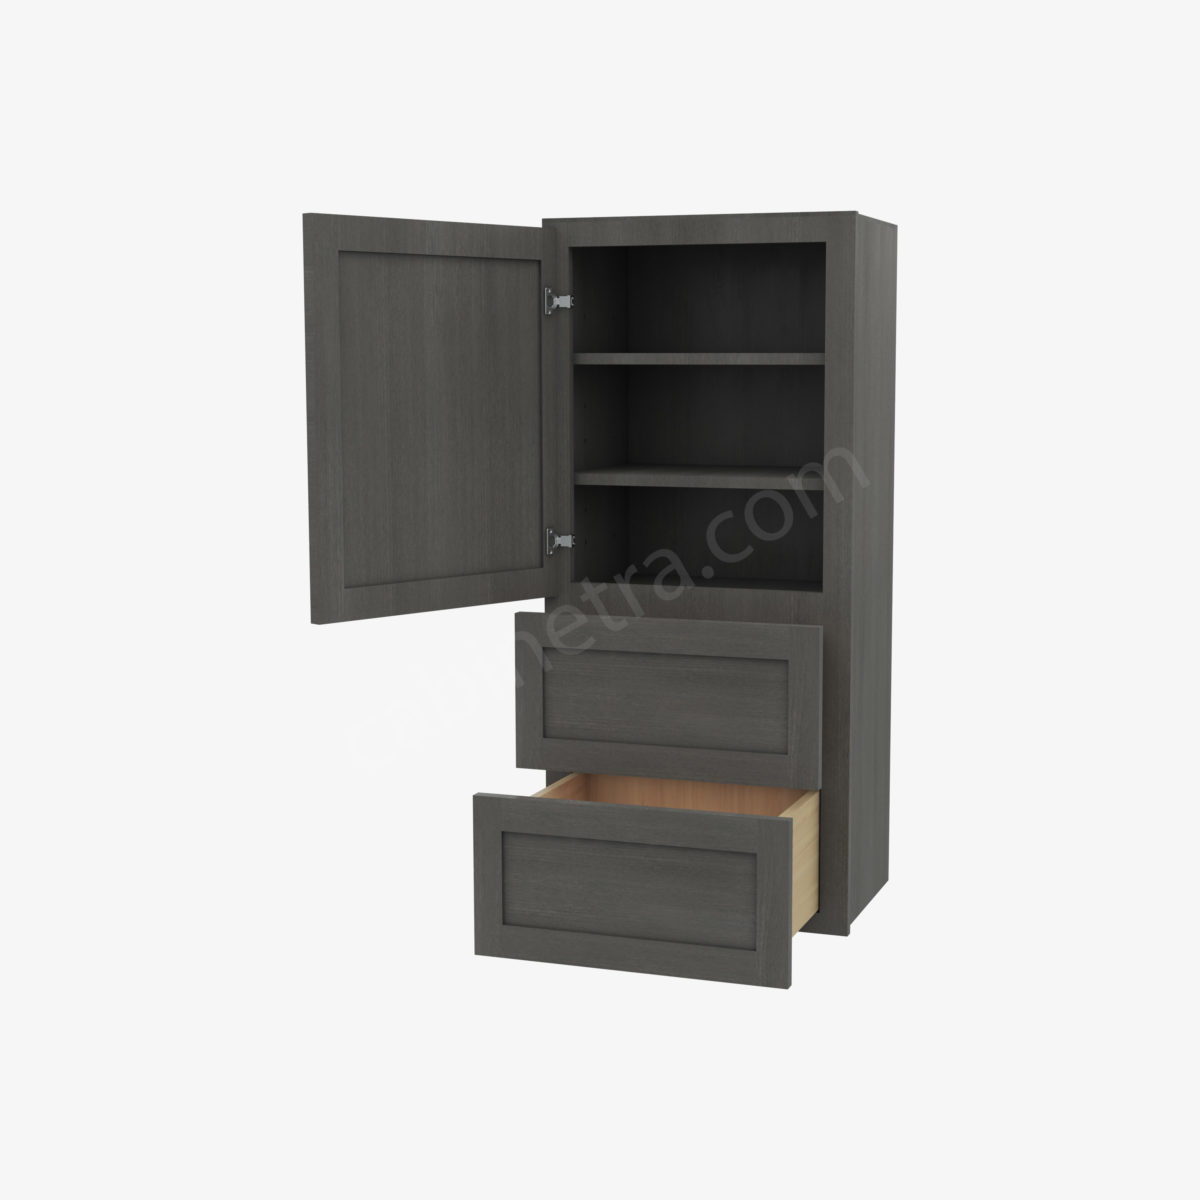 AG W2D1848 5 Forevermark Greystone Shaker Cabinetra scaled